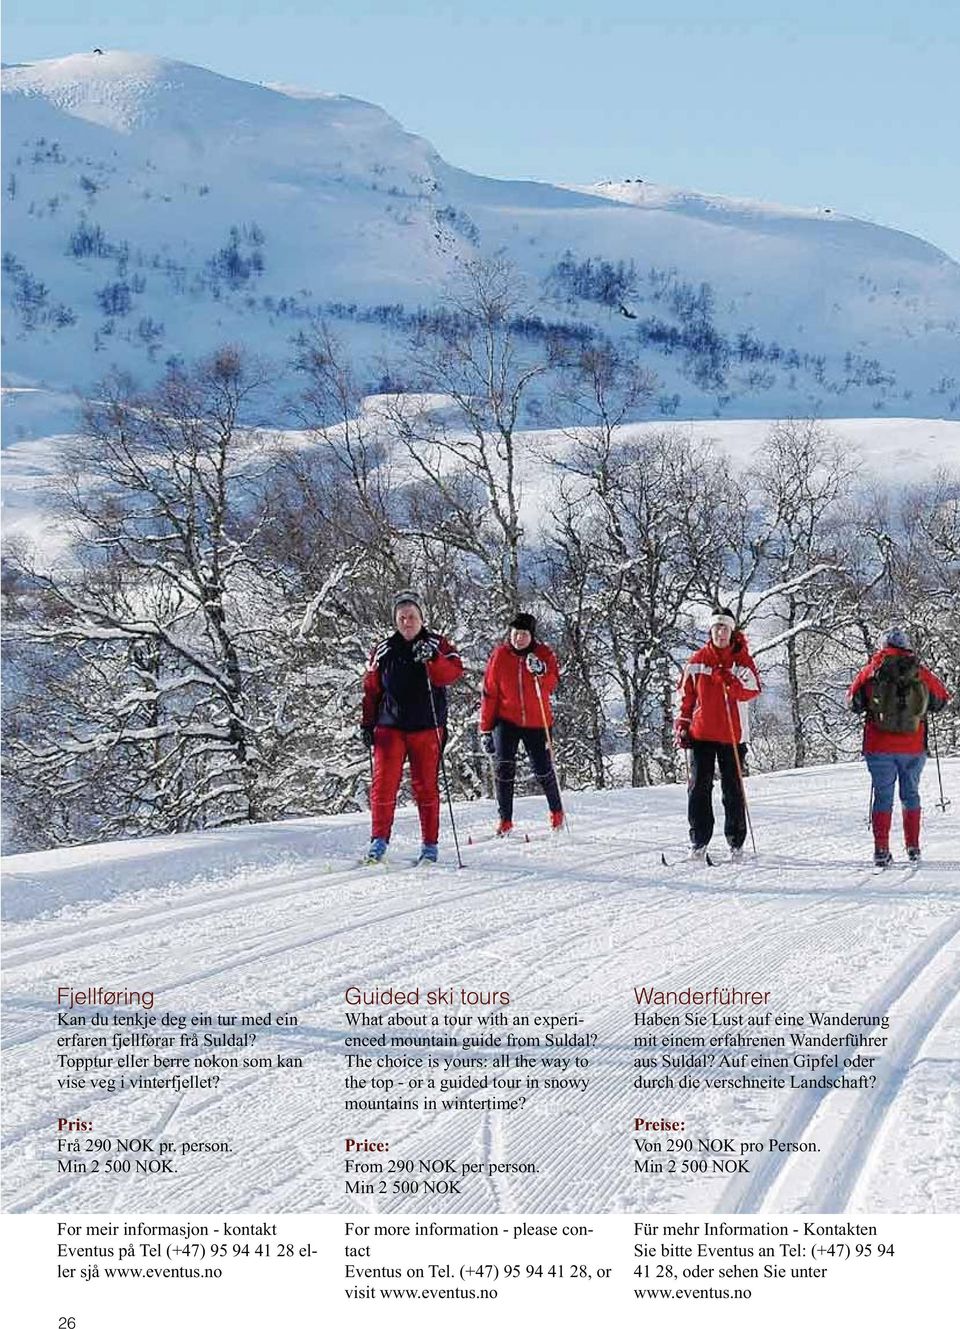 The choice is yours: all the way to the top - or a guided tour in snowy mountains in wintertime? Price: From 290 NOK per person. Min 2 500 NOK For more information - please contact Eventus on Tel.